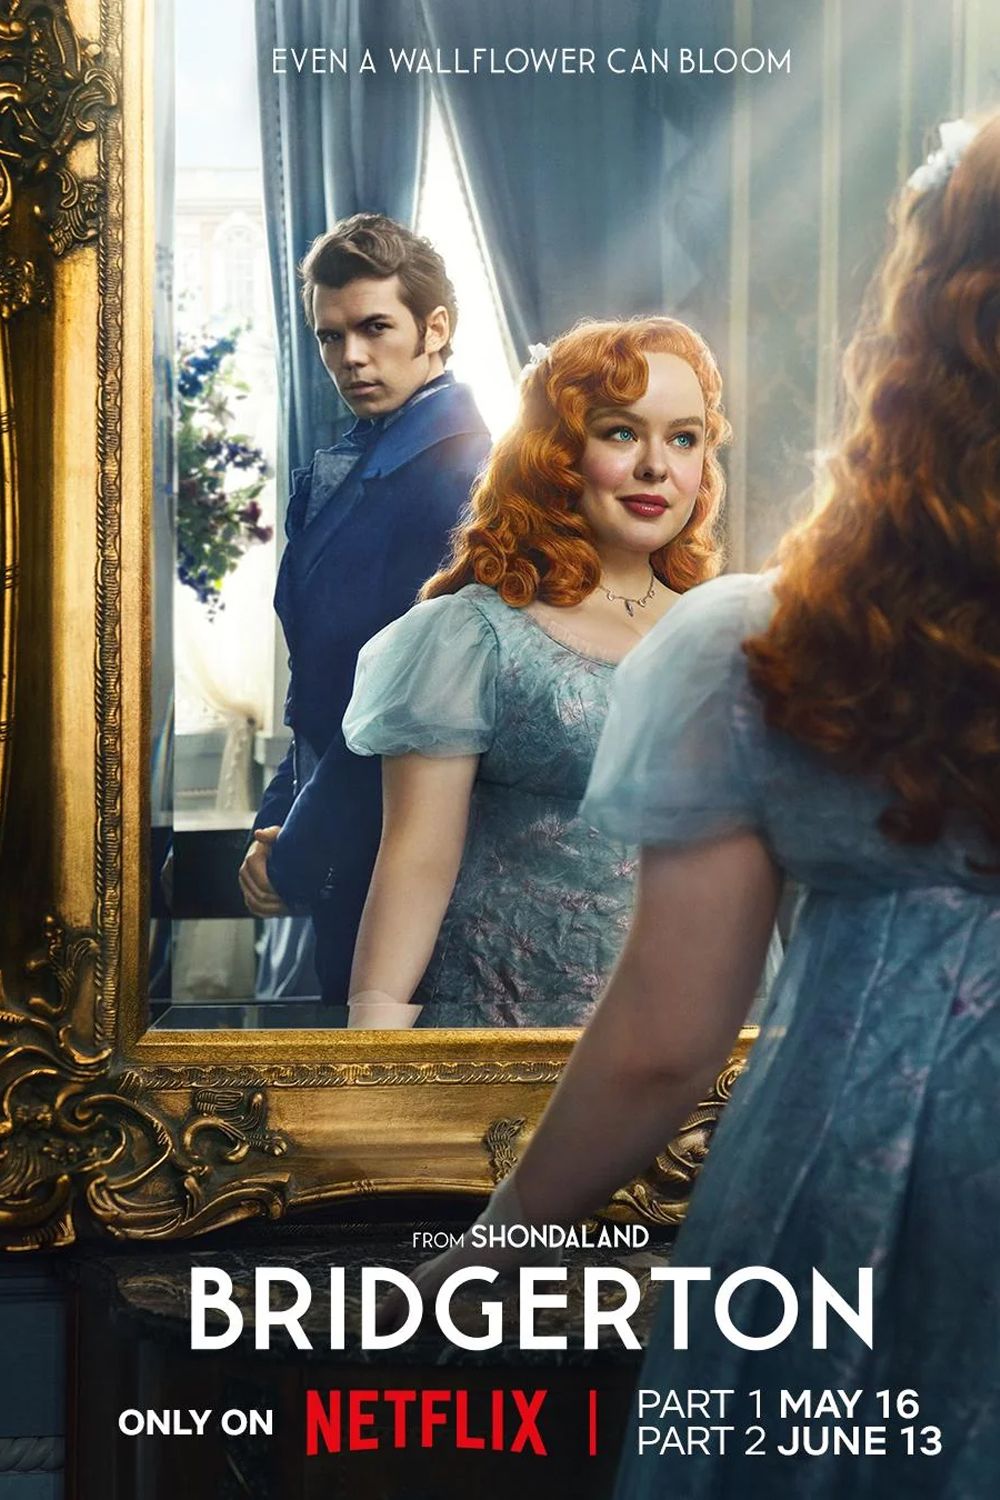 Poster for the third season of Bridgerton shows Penelope Featherington looking in the mirror